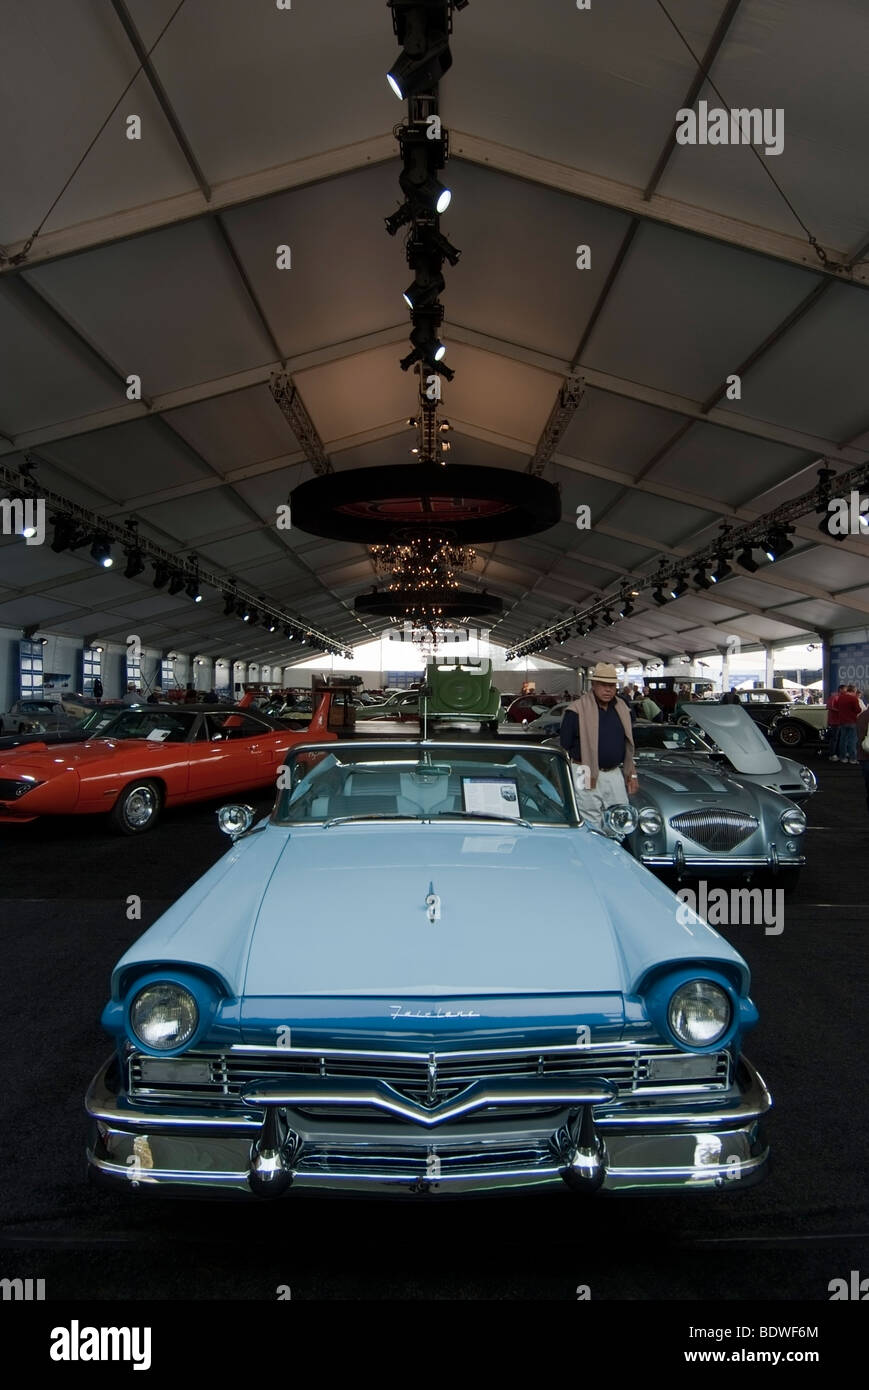 1957 Ford Fairlane 500 Sunliner convertible E-code in the Gooding & Company tent at the 2009 Pebble Beach Concours d'Elegance Stock Photo